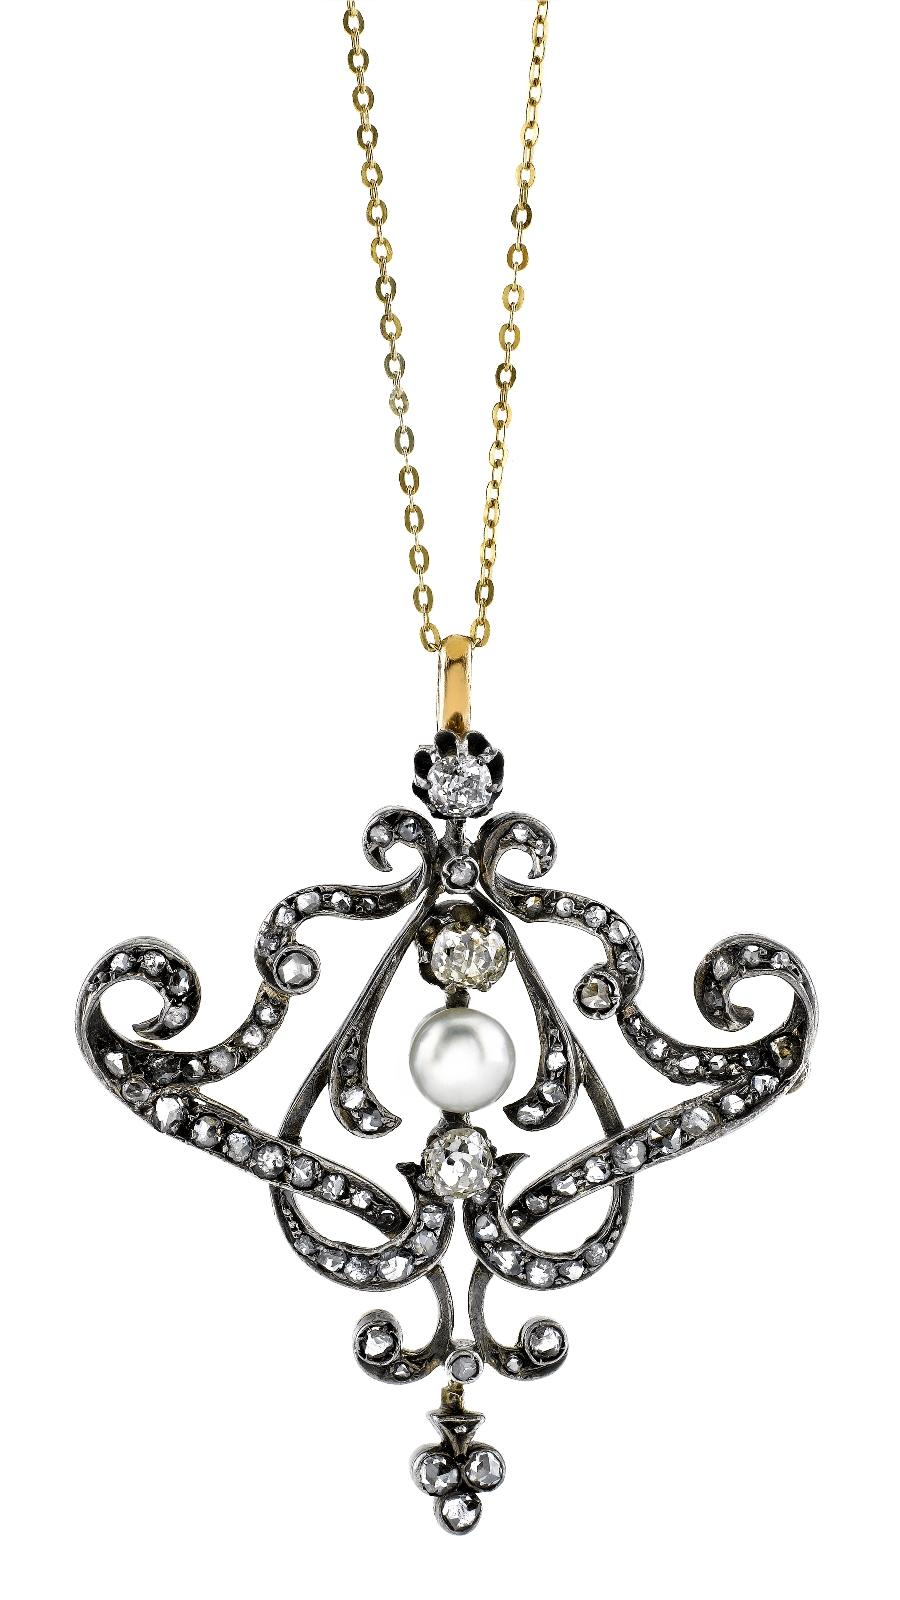 Victorian Antique 2.40 Carat Old Mind Cut Diamonds and Natural Pearl Pendant